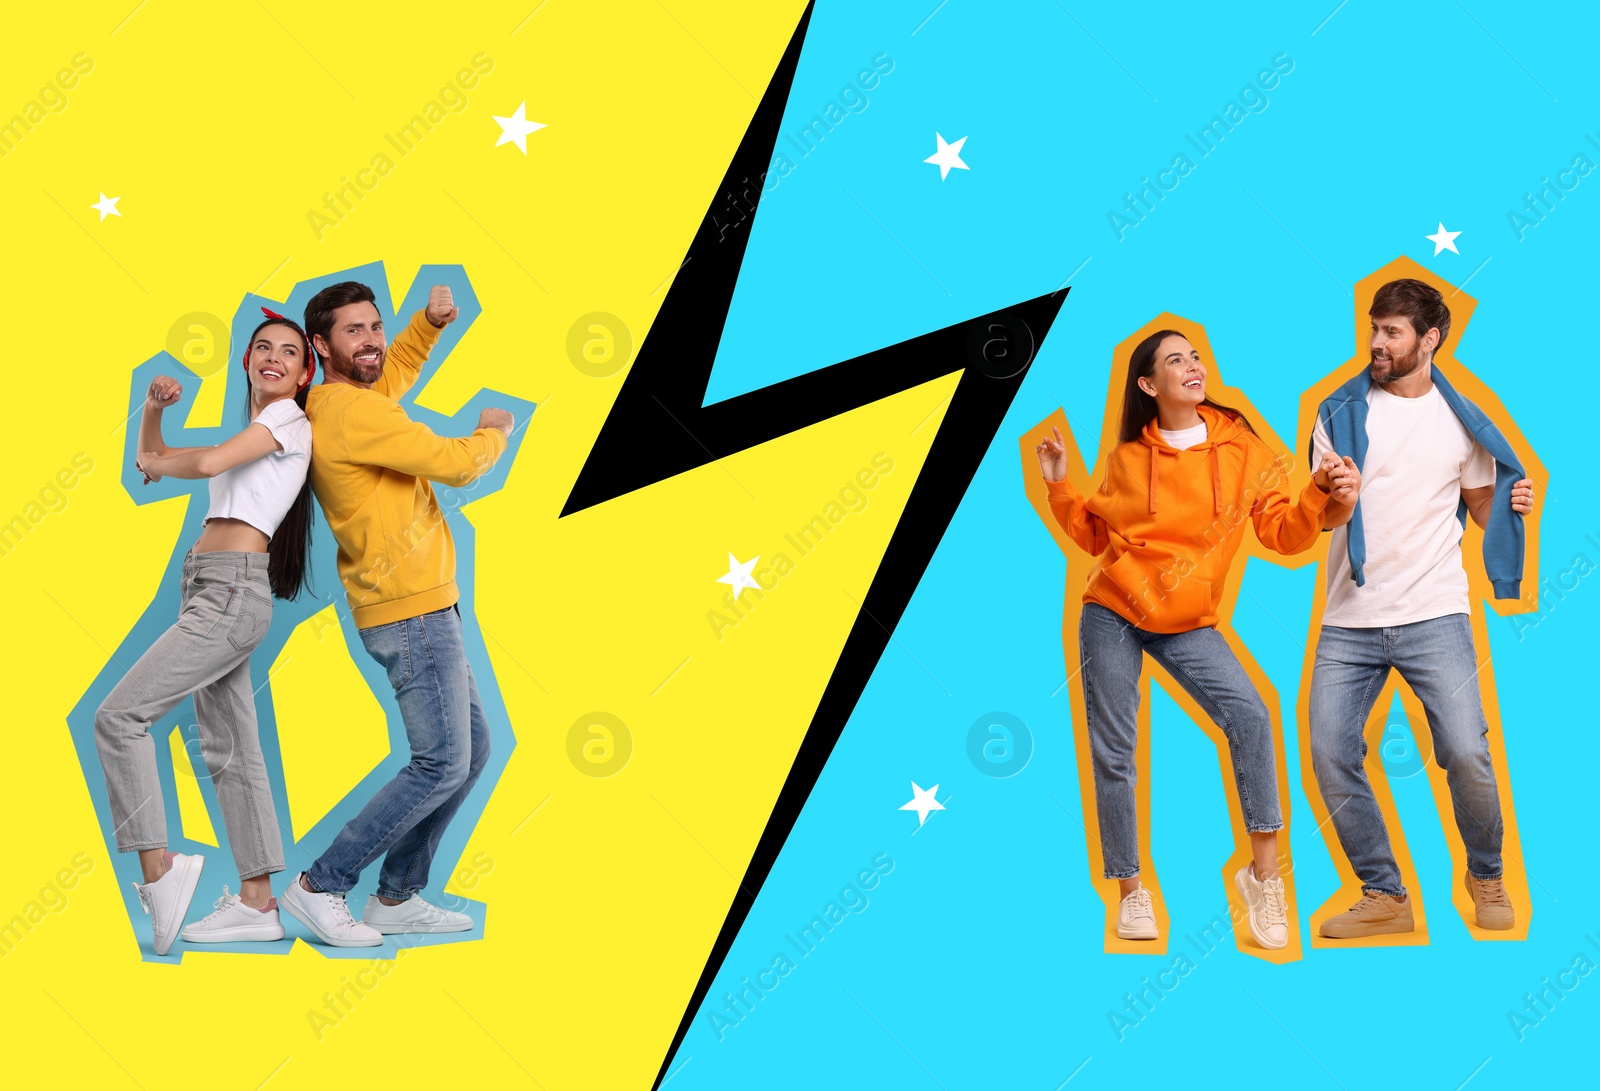 Image of Pop art poster. Couple dancing on bright comic style background